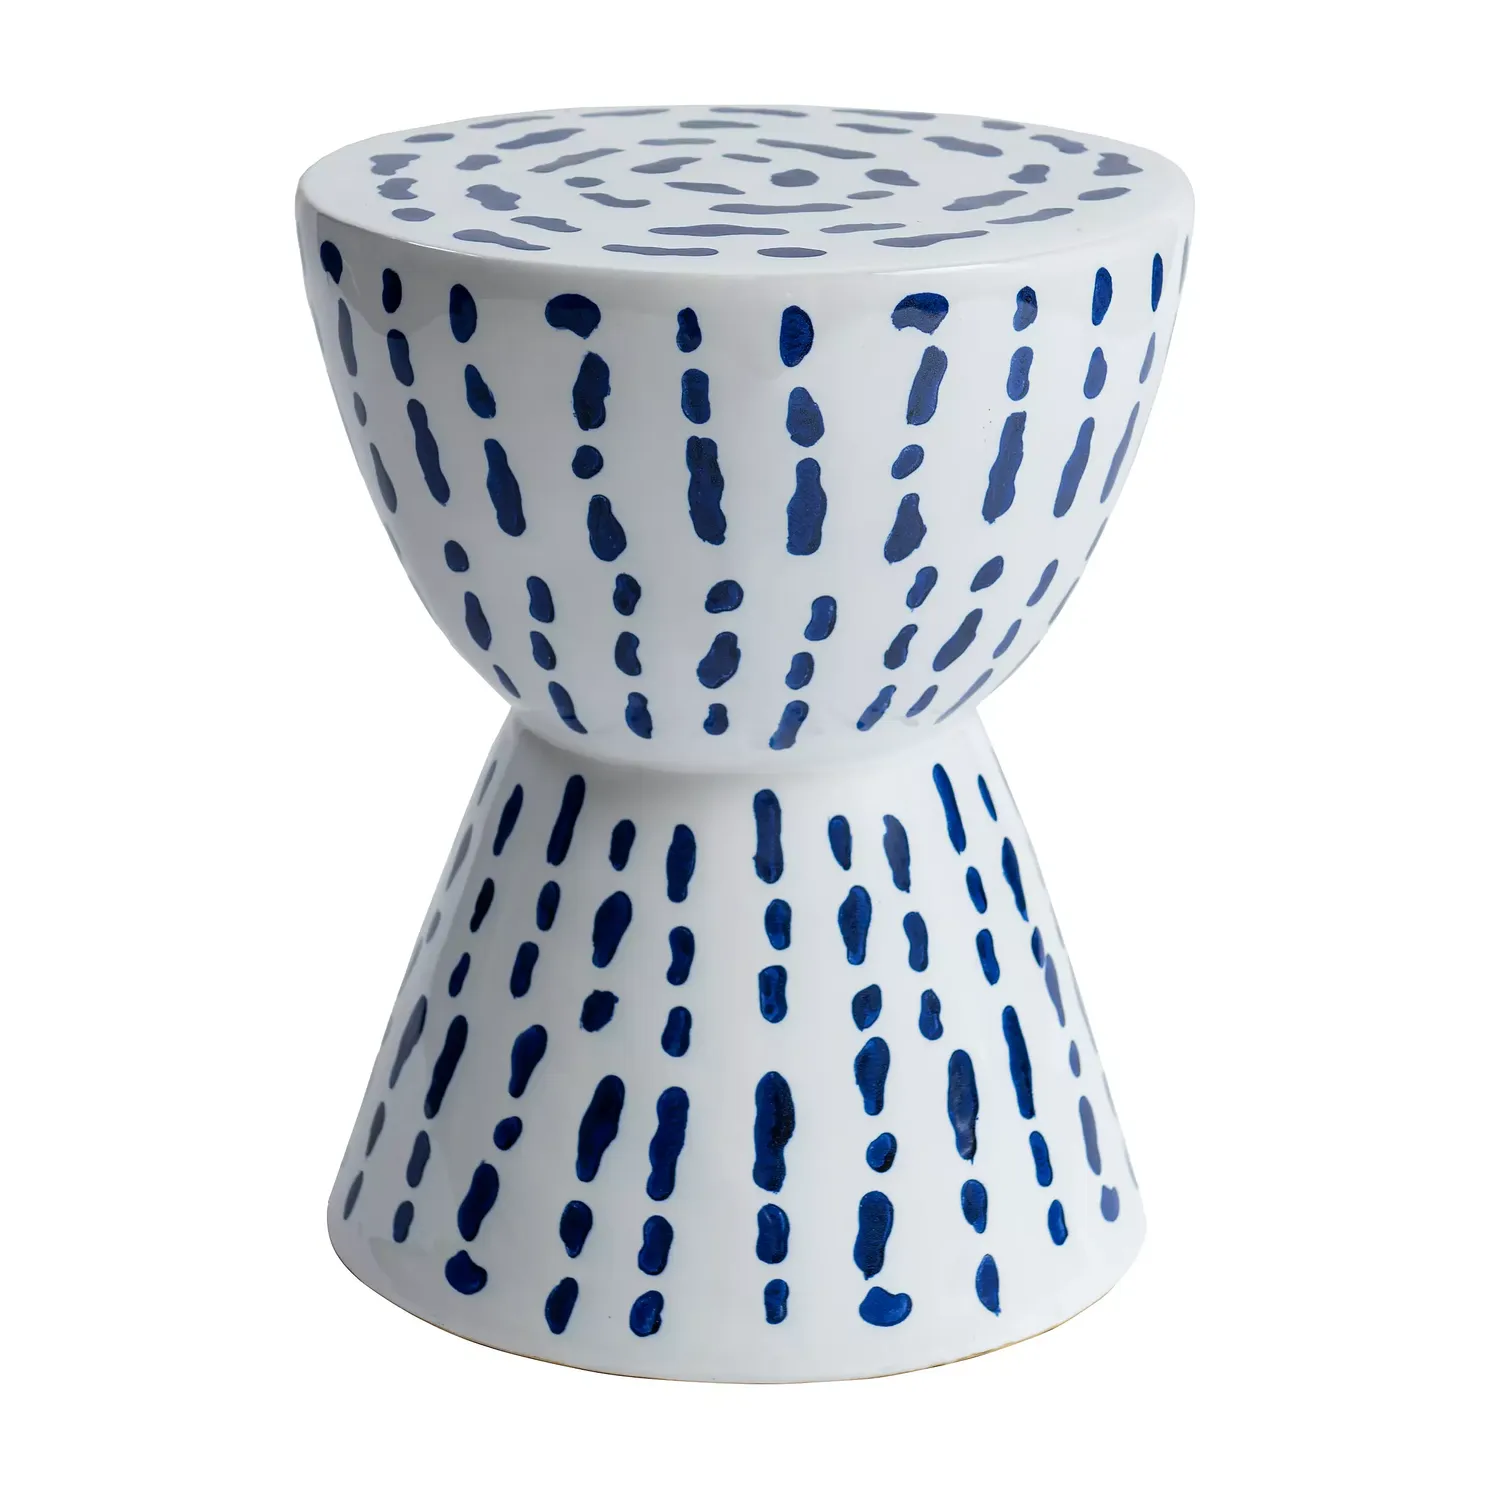 Shop White and Blue Ceramic Stool from Kirkland's on Openhaus